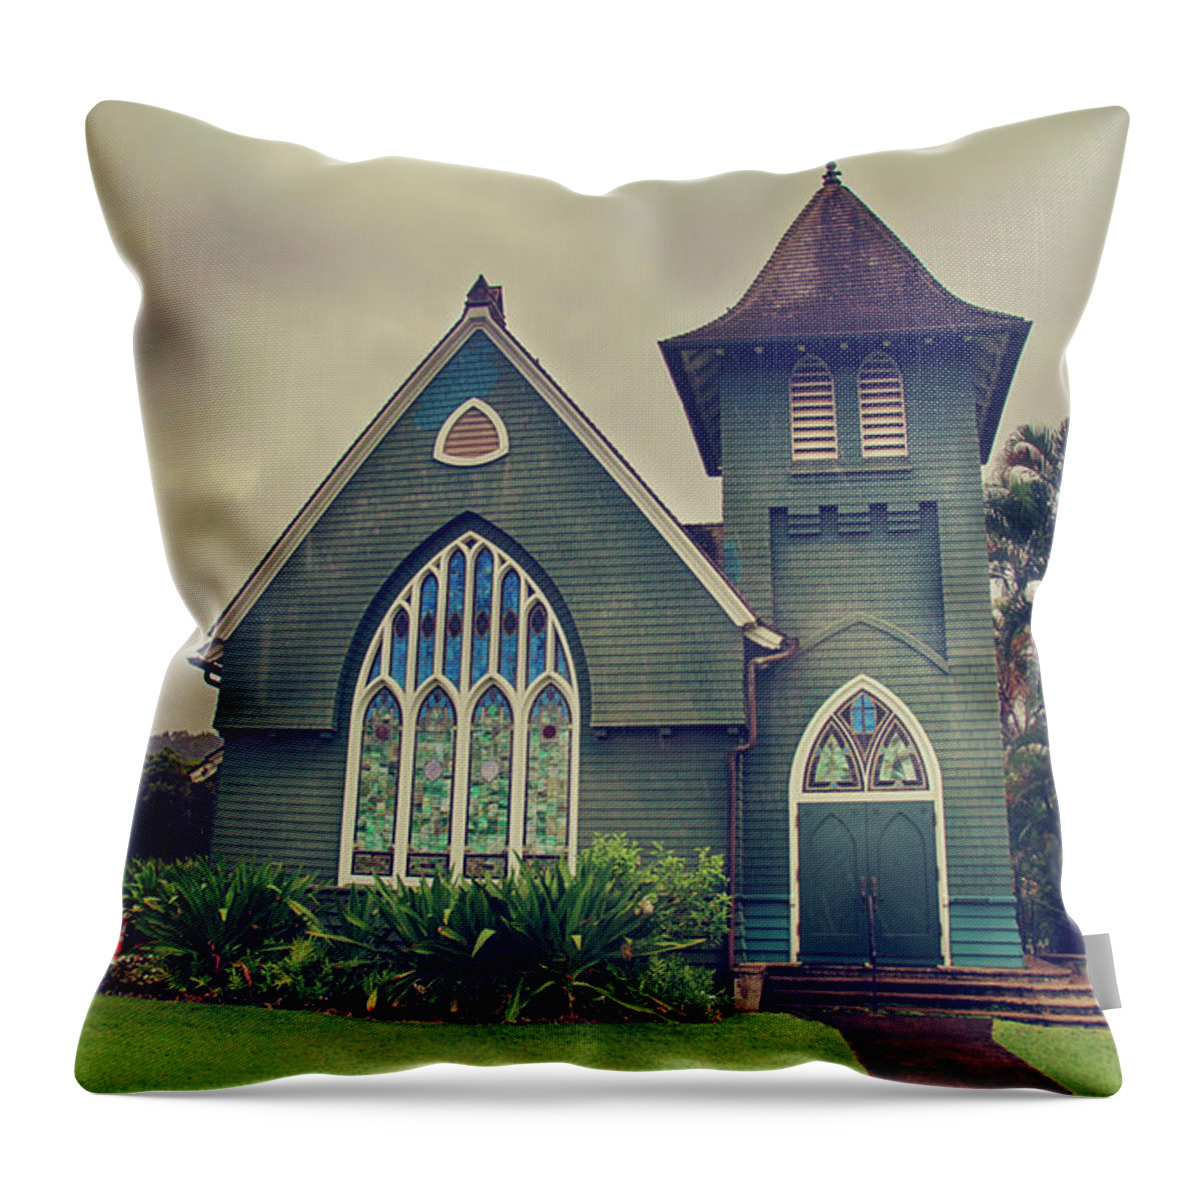 Hanalei Throw Pillow featuring the photograph Little Green Church by Laurie Search